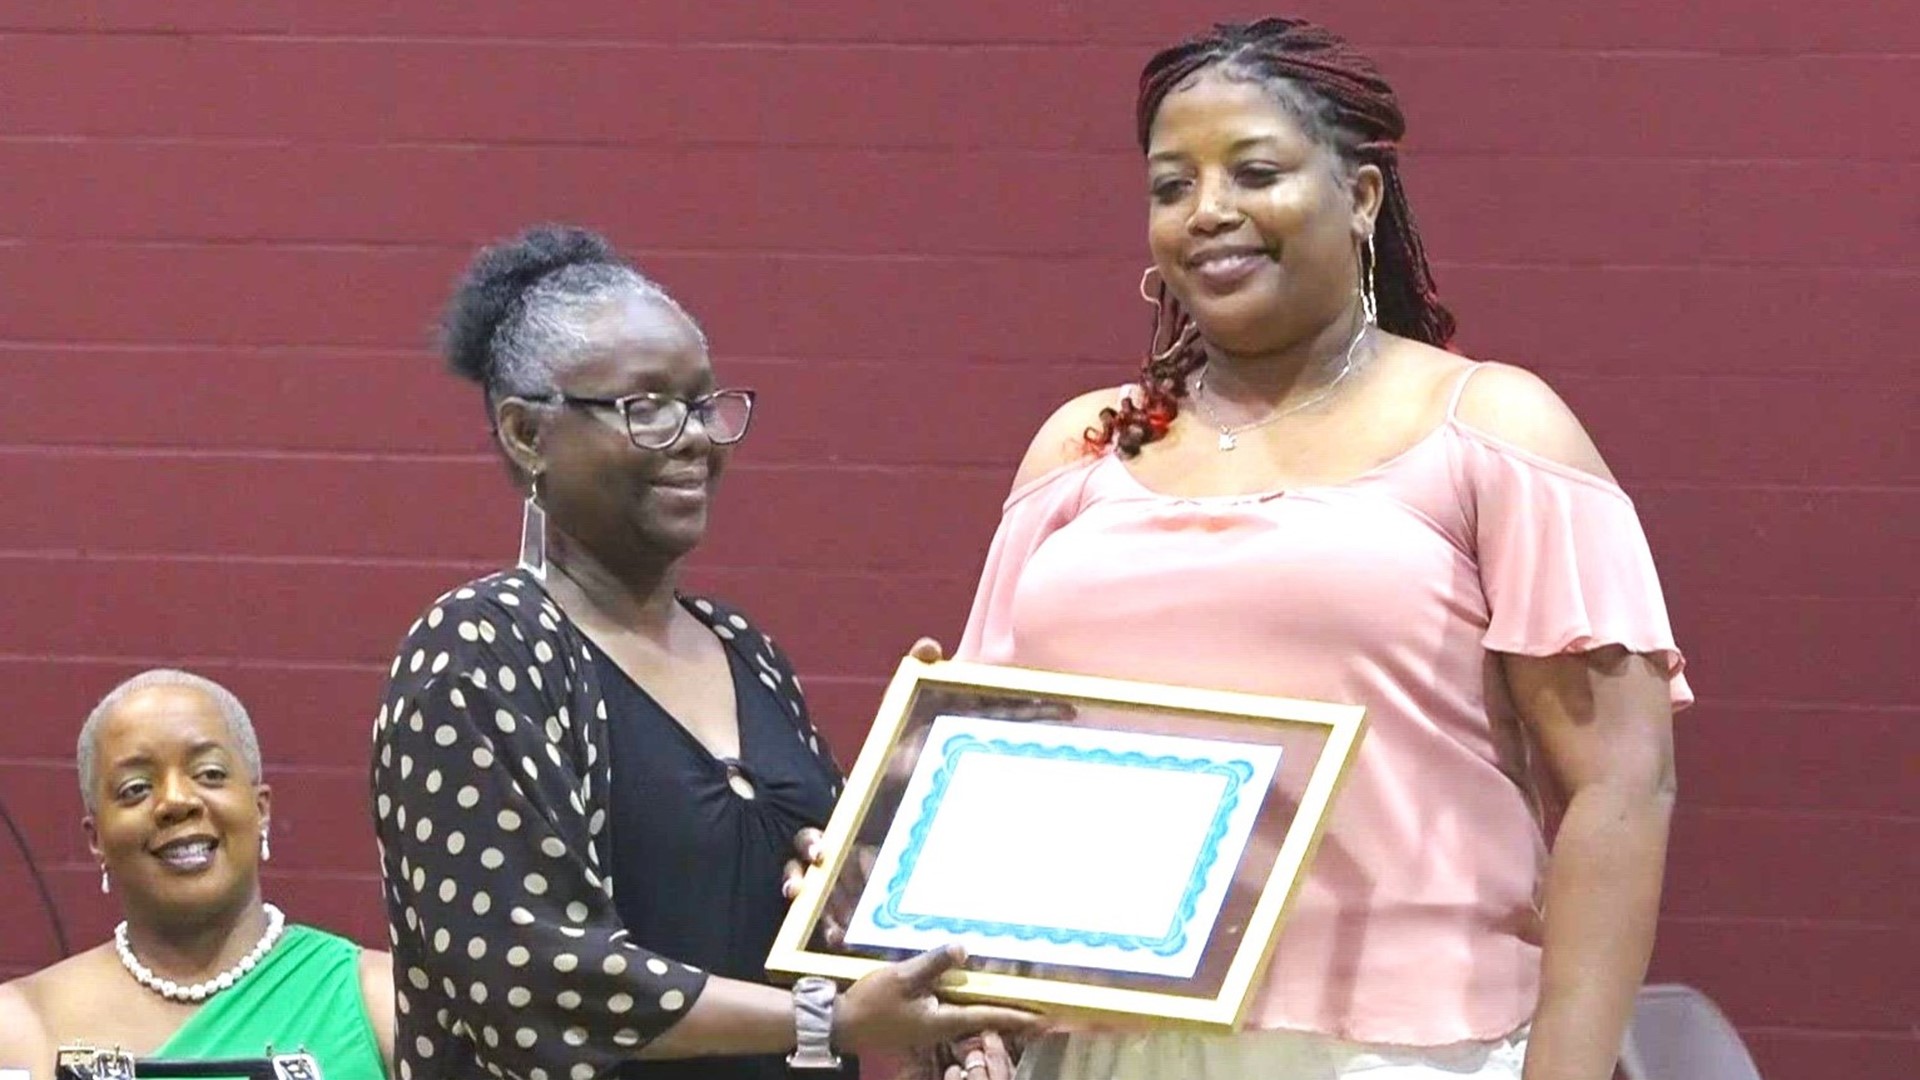 On Saturday night, five inductees were honored at the Batesburg-Leesville Leisure Center.